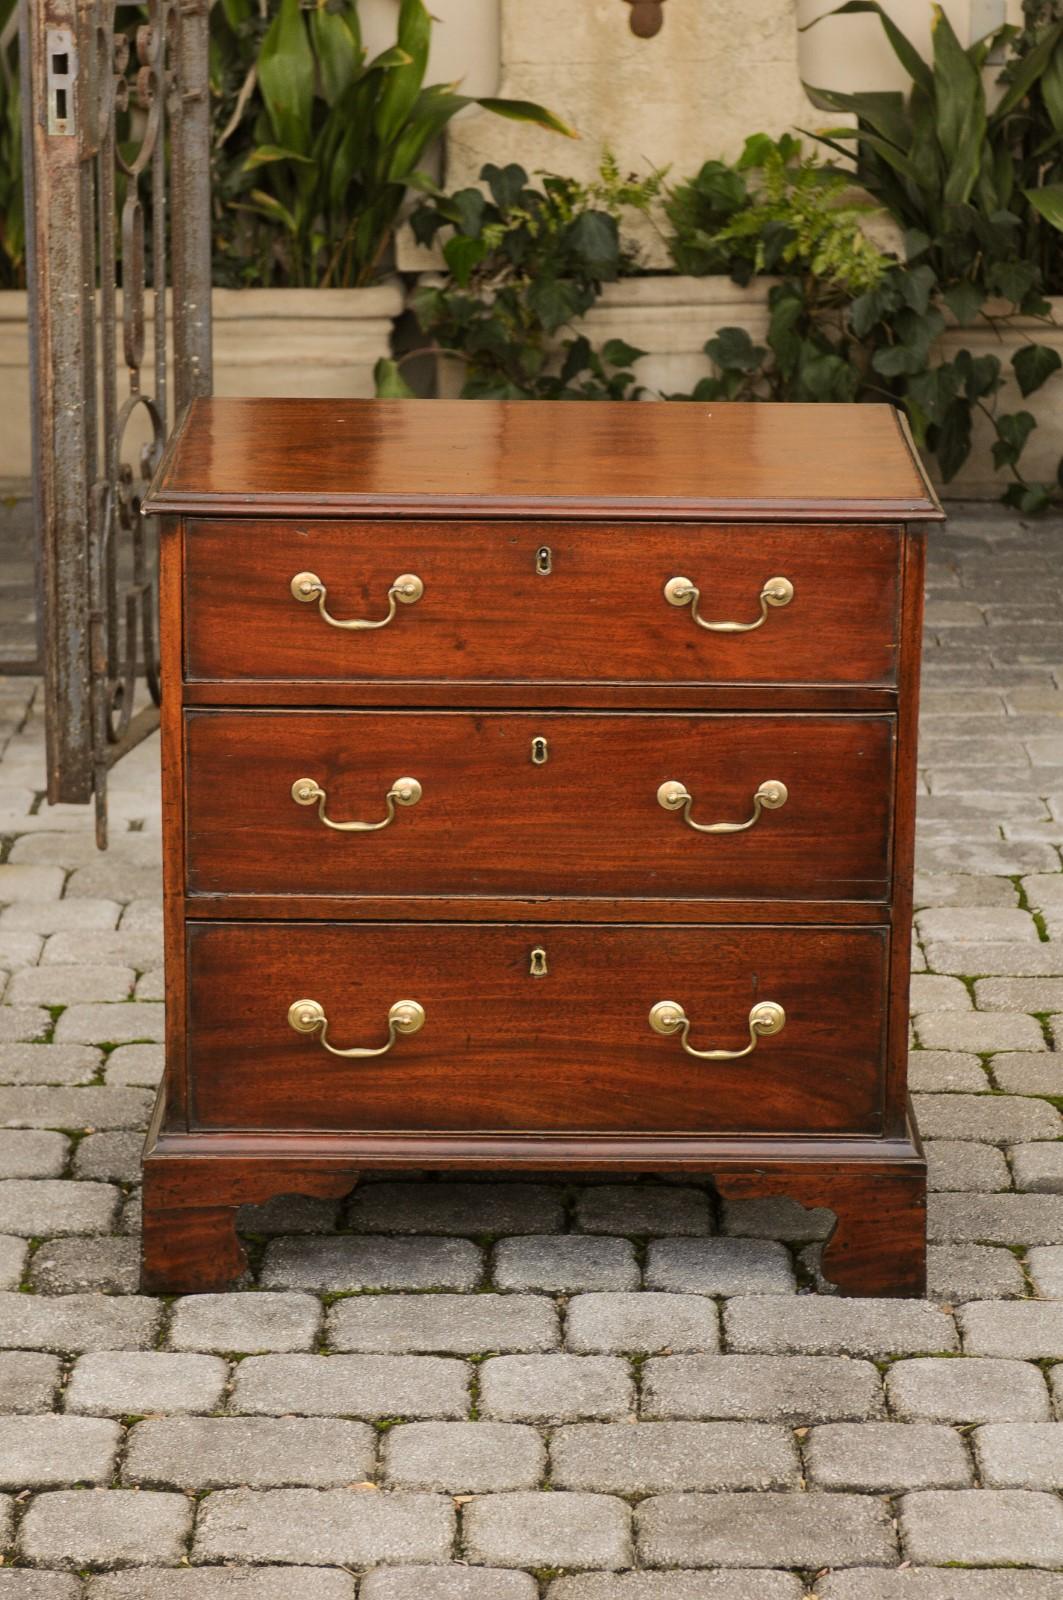 An English mahogany bachelor's chest from the mid-19th century, with three drawers, brass hardware and bracket feet. Born in England during the third quarter of the 19th century, this exquisite bachelor's chest features a rectangular top with molded